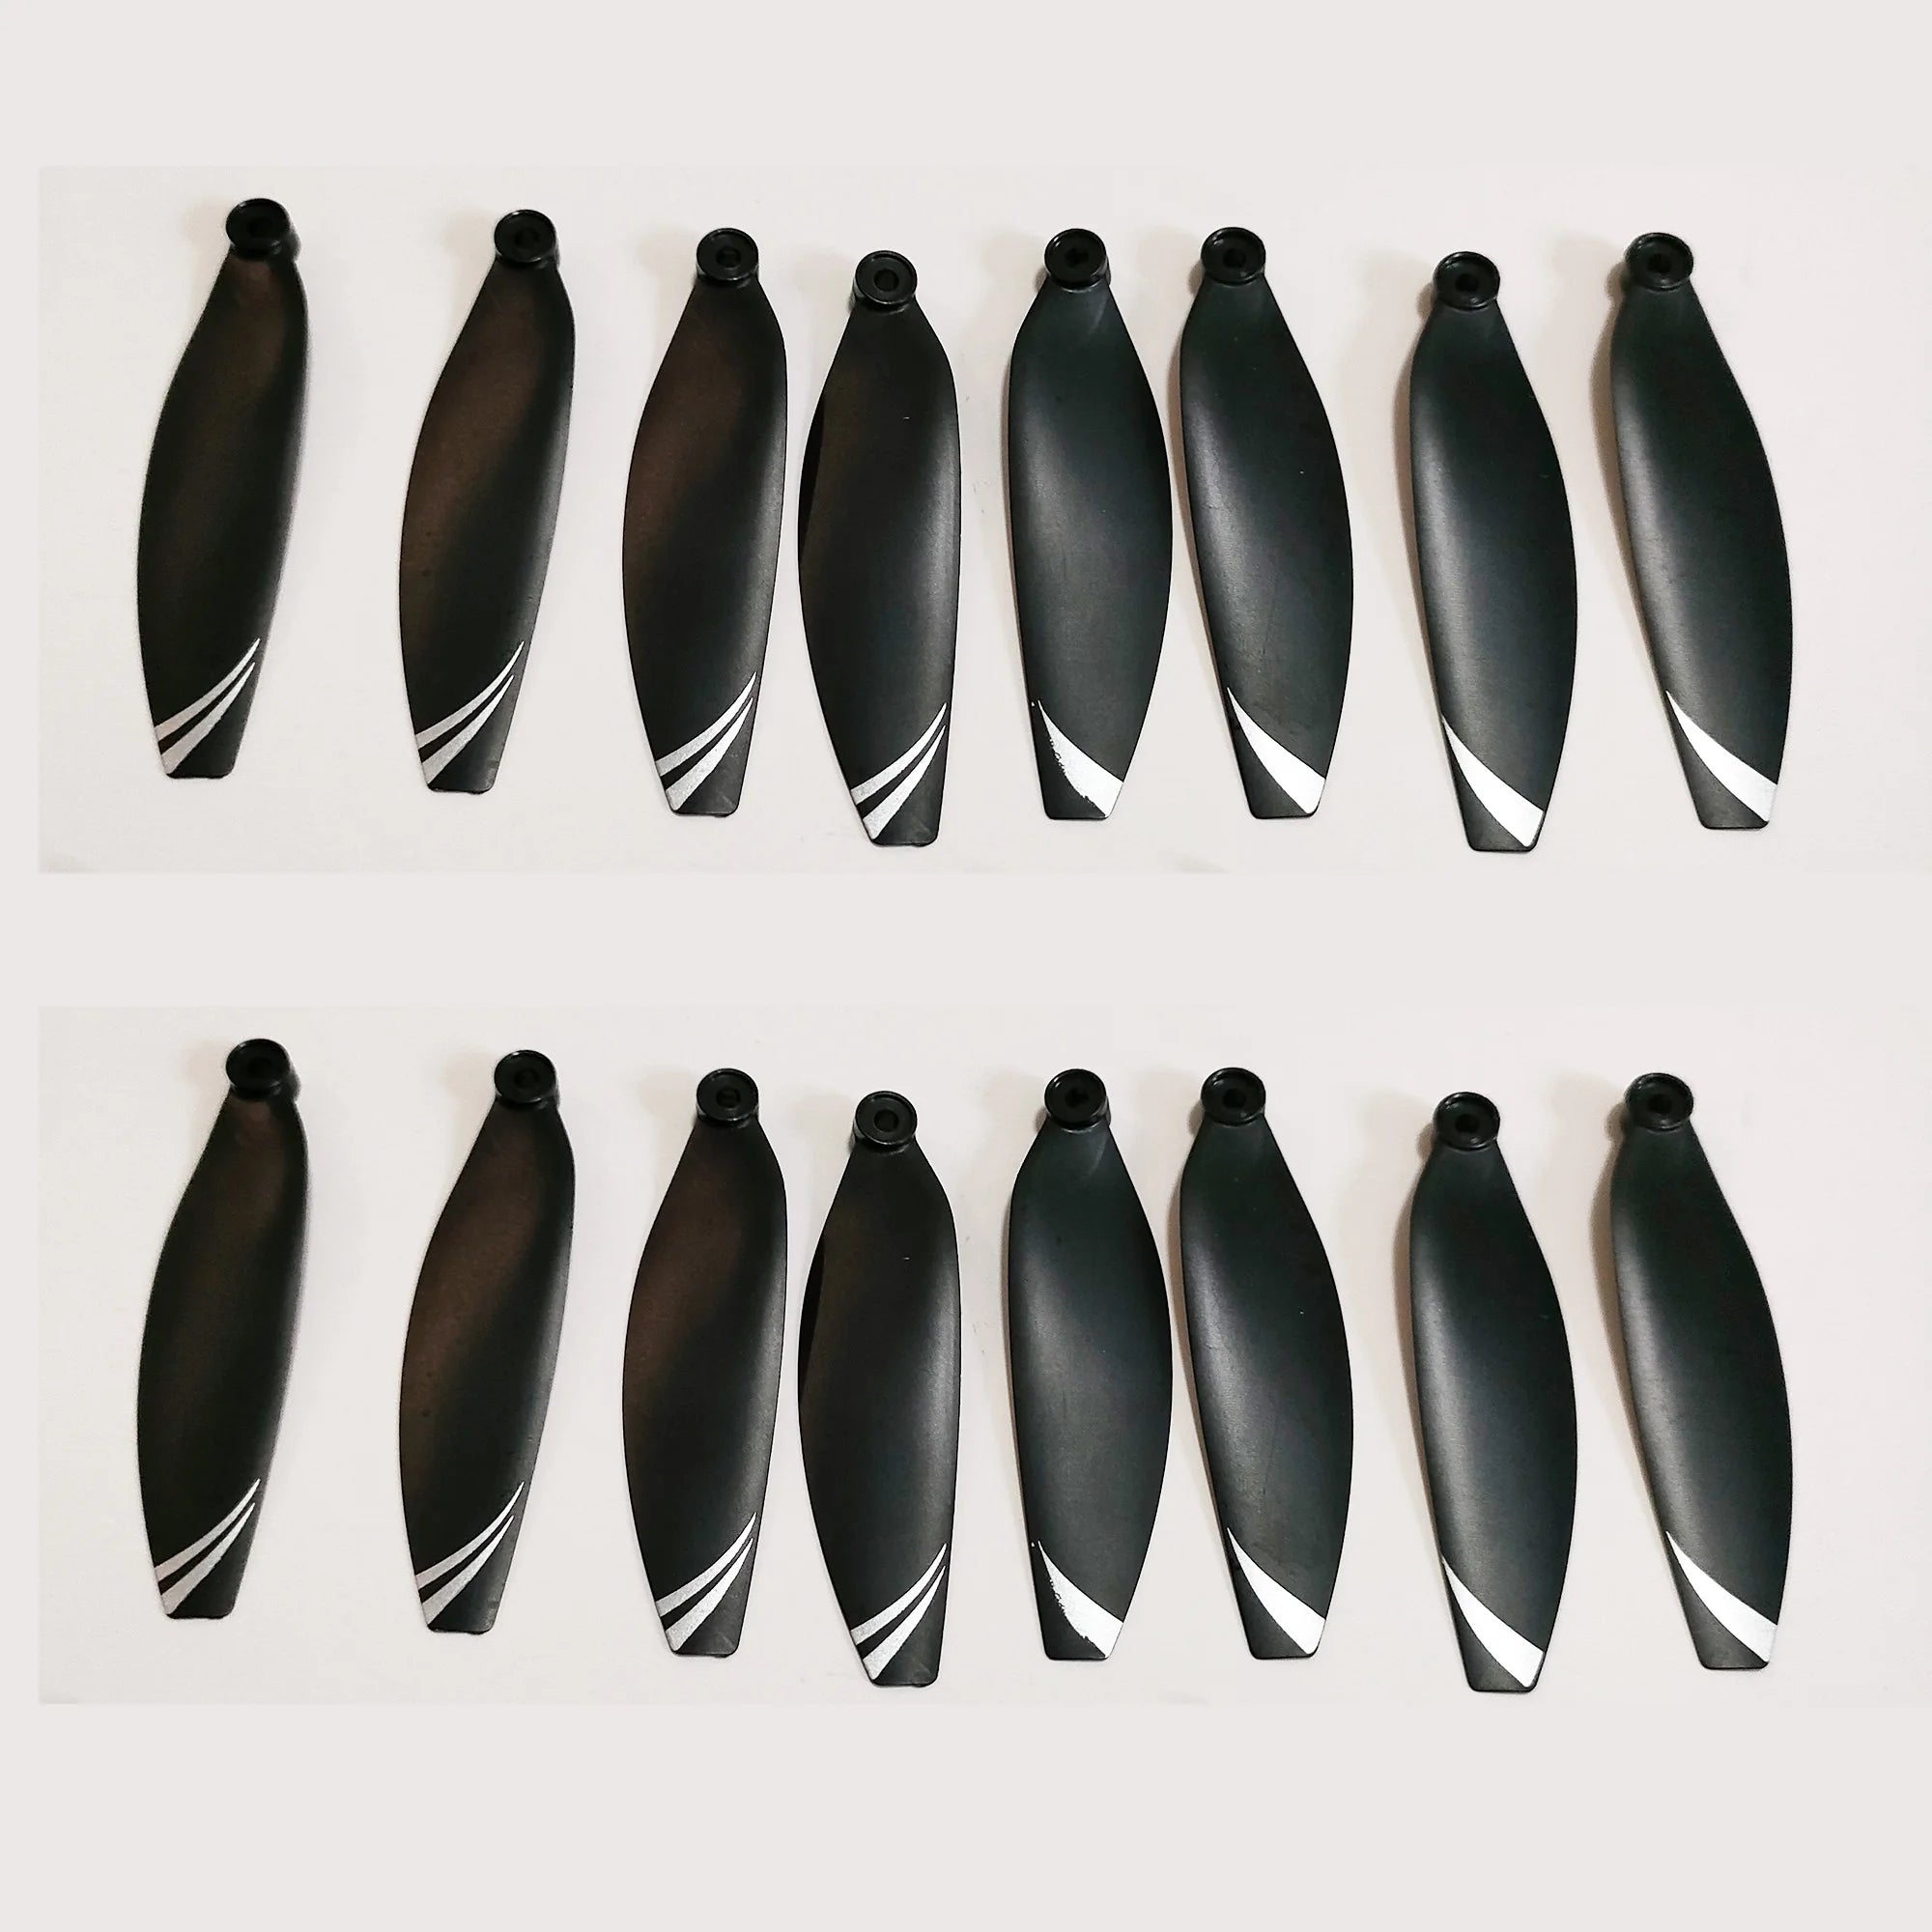 JJRC X16 CW CCW Propeller, X16 CW CCW Propeller SPECIFICATIONS Recommend